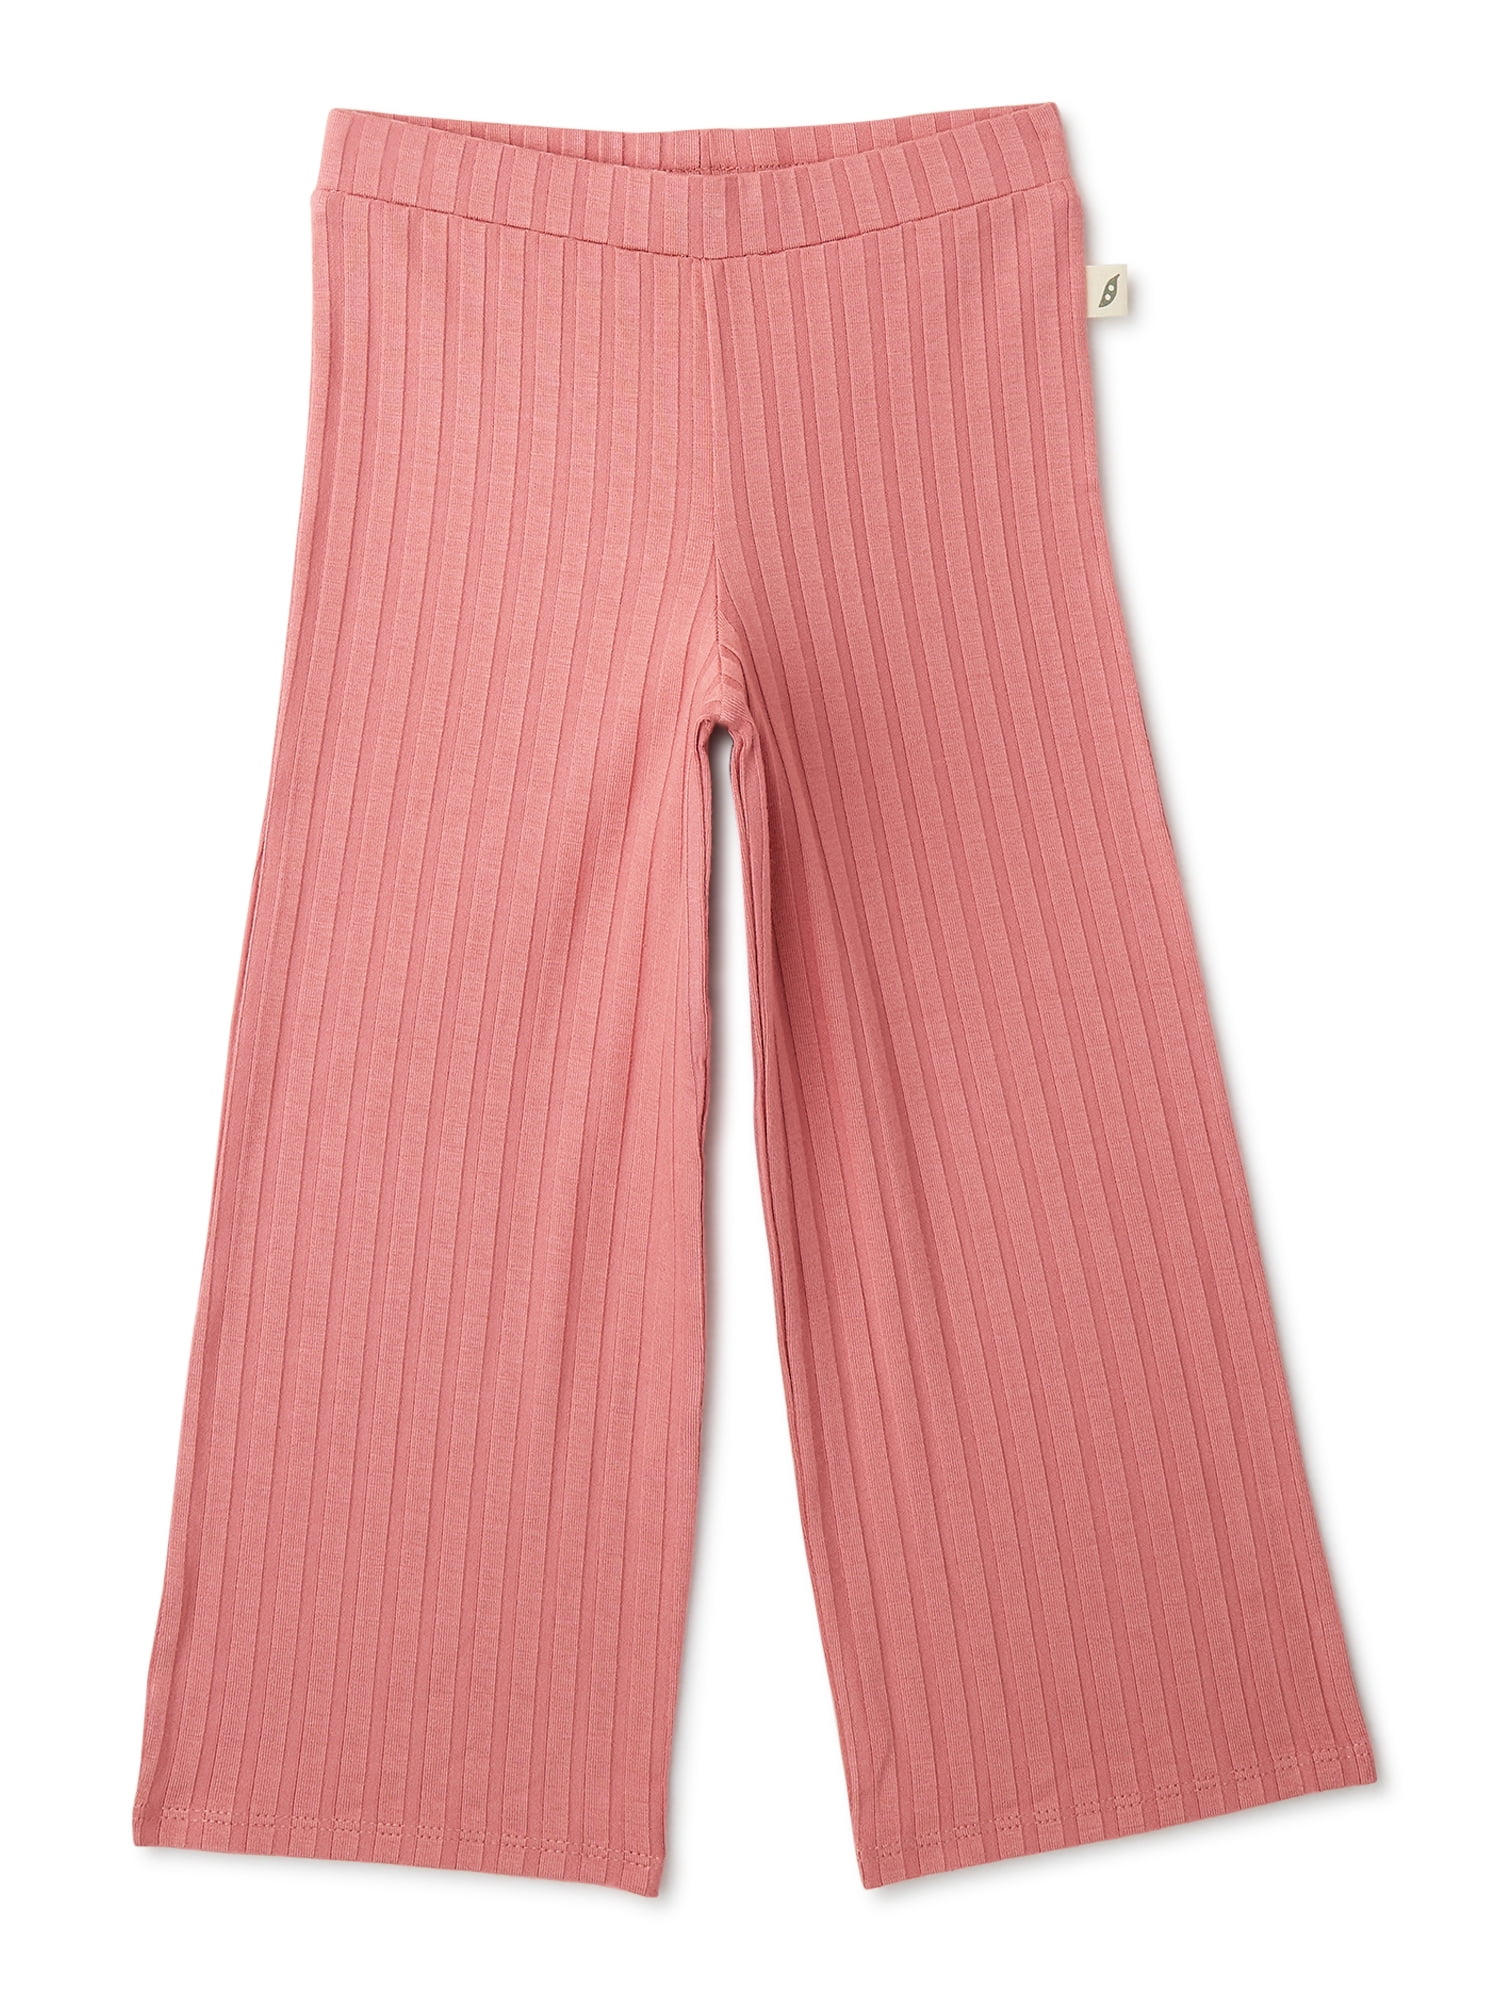 easy-peasy Baby and Toddler Girl Ribbed Pant, Sizes 12 Months-5T